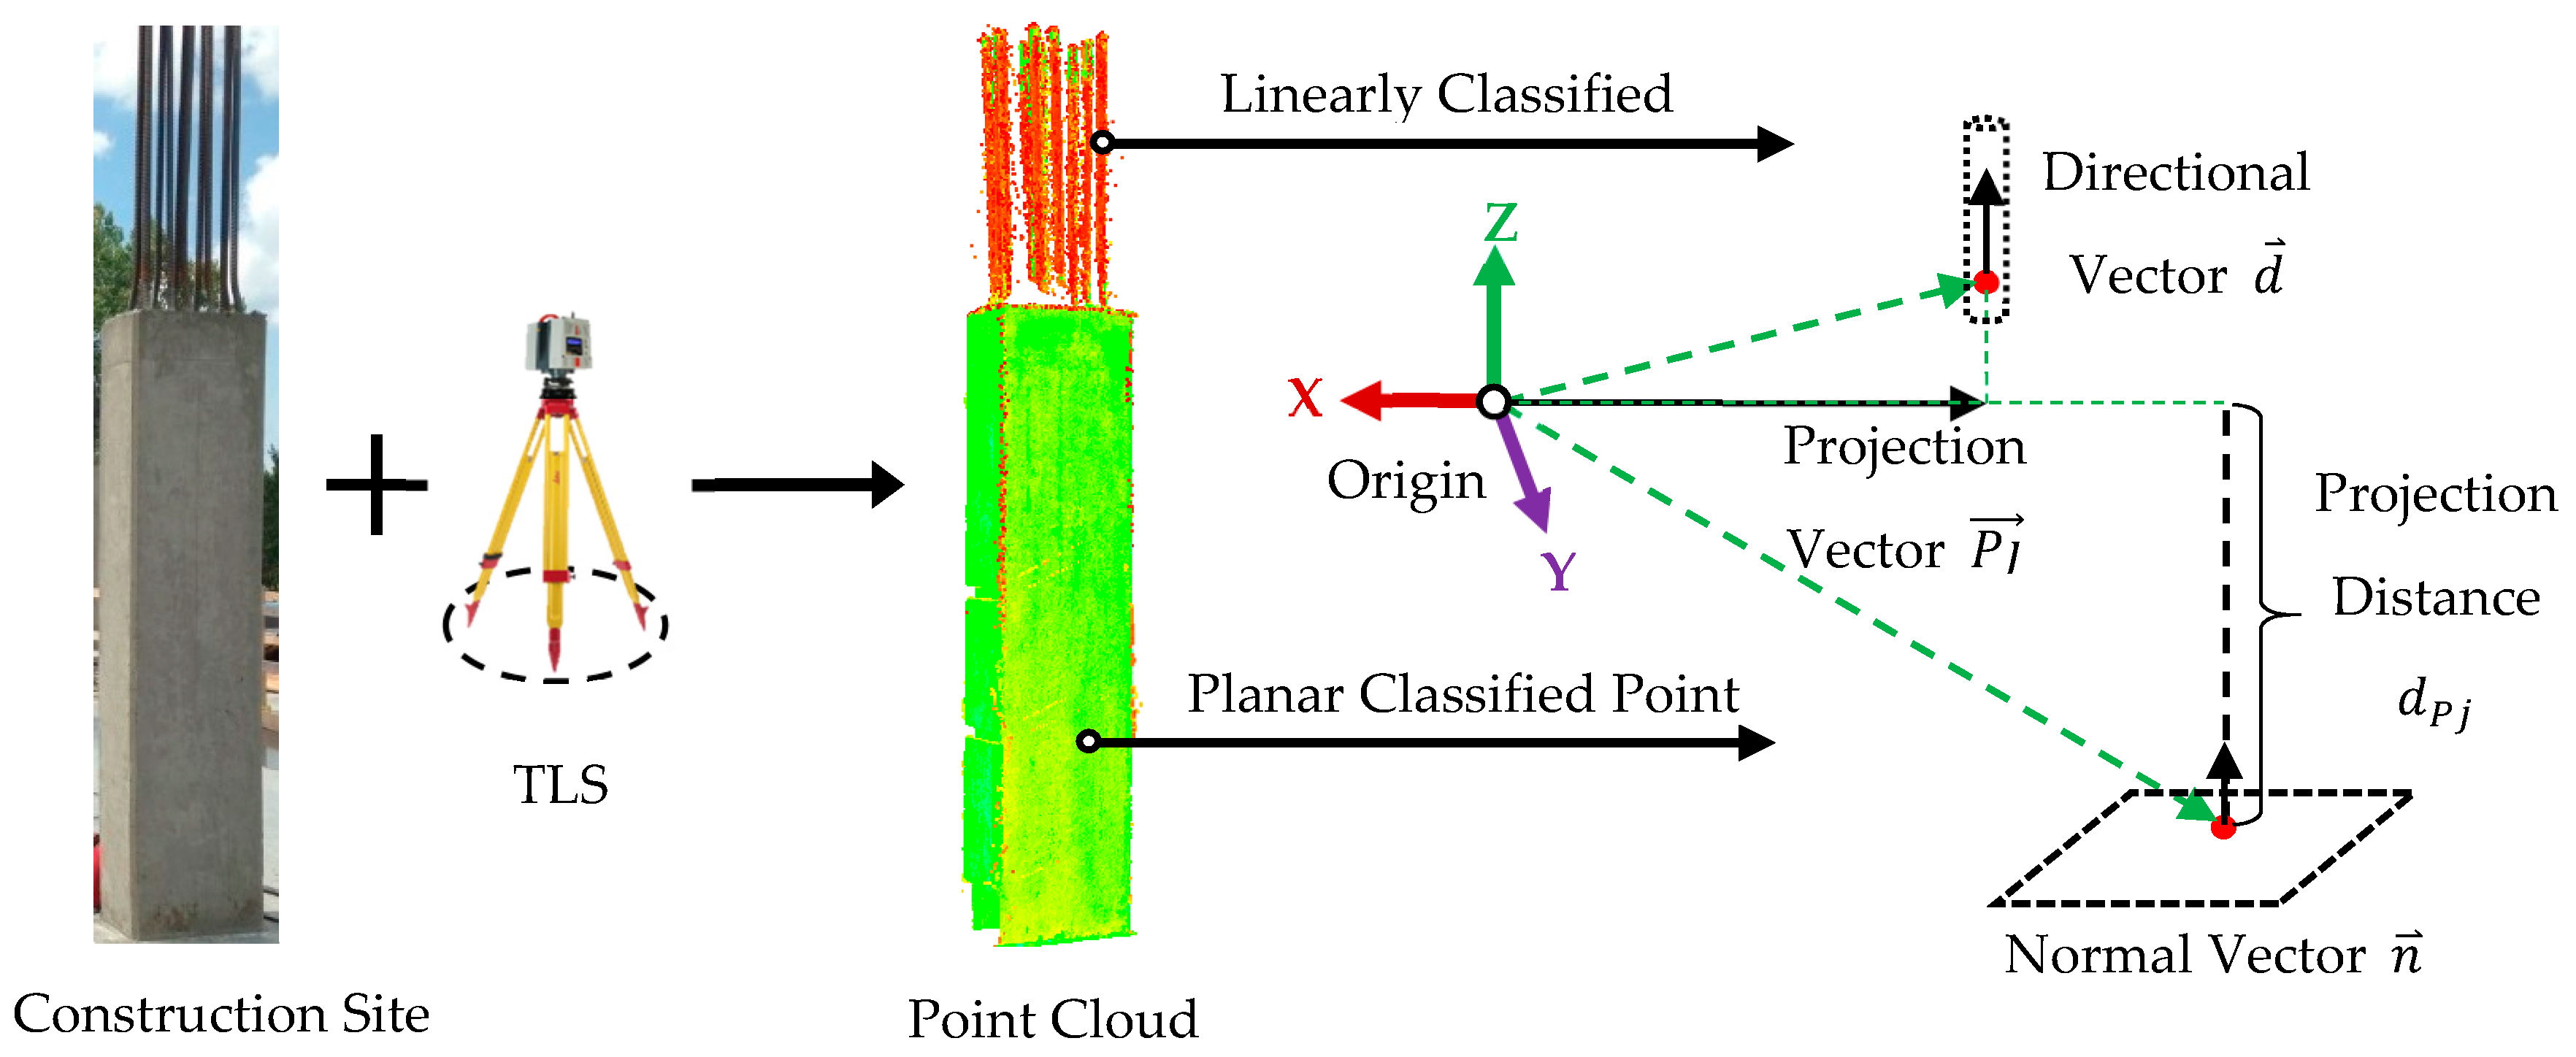 Sensors Free Full Text Robust Segmentation Of Planar And Linear Features Of Terrestrial Laser Scanner Point Clouds Acquired From Construction Sites Html